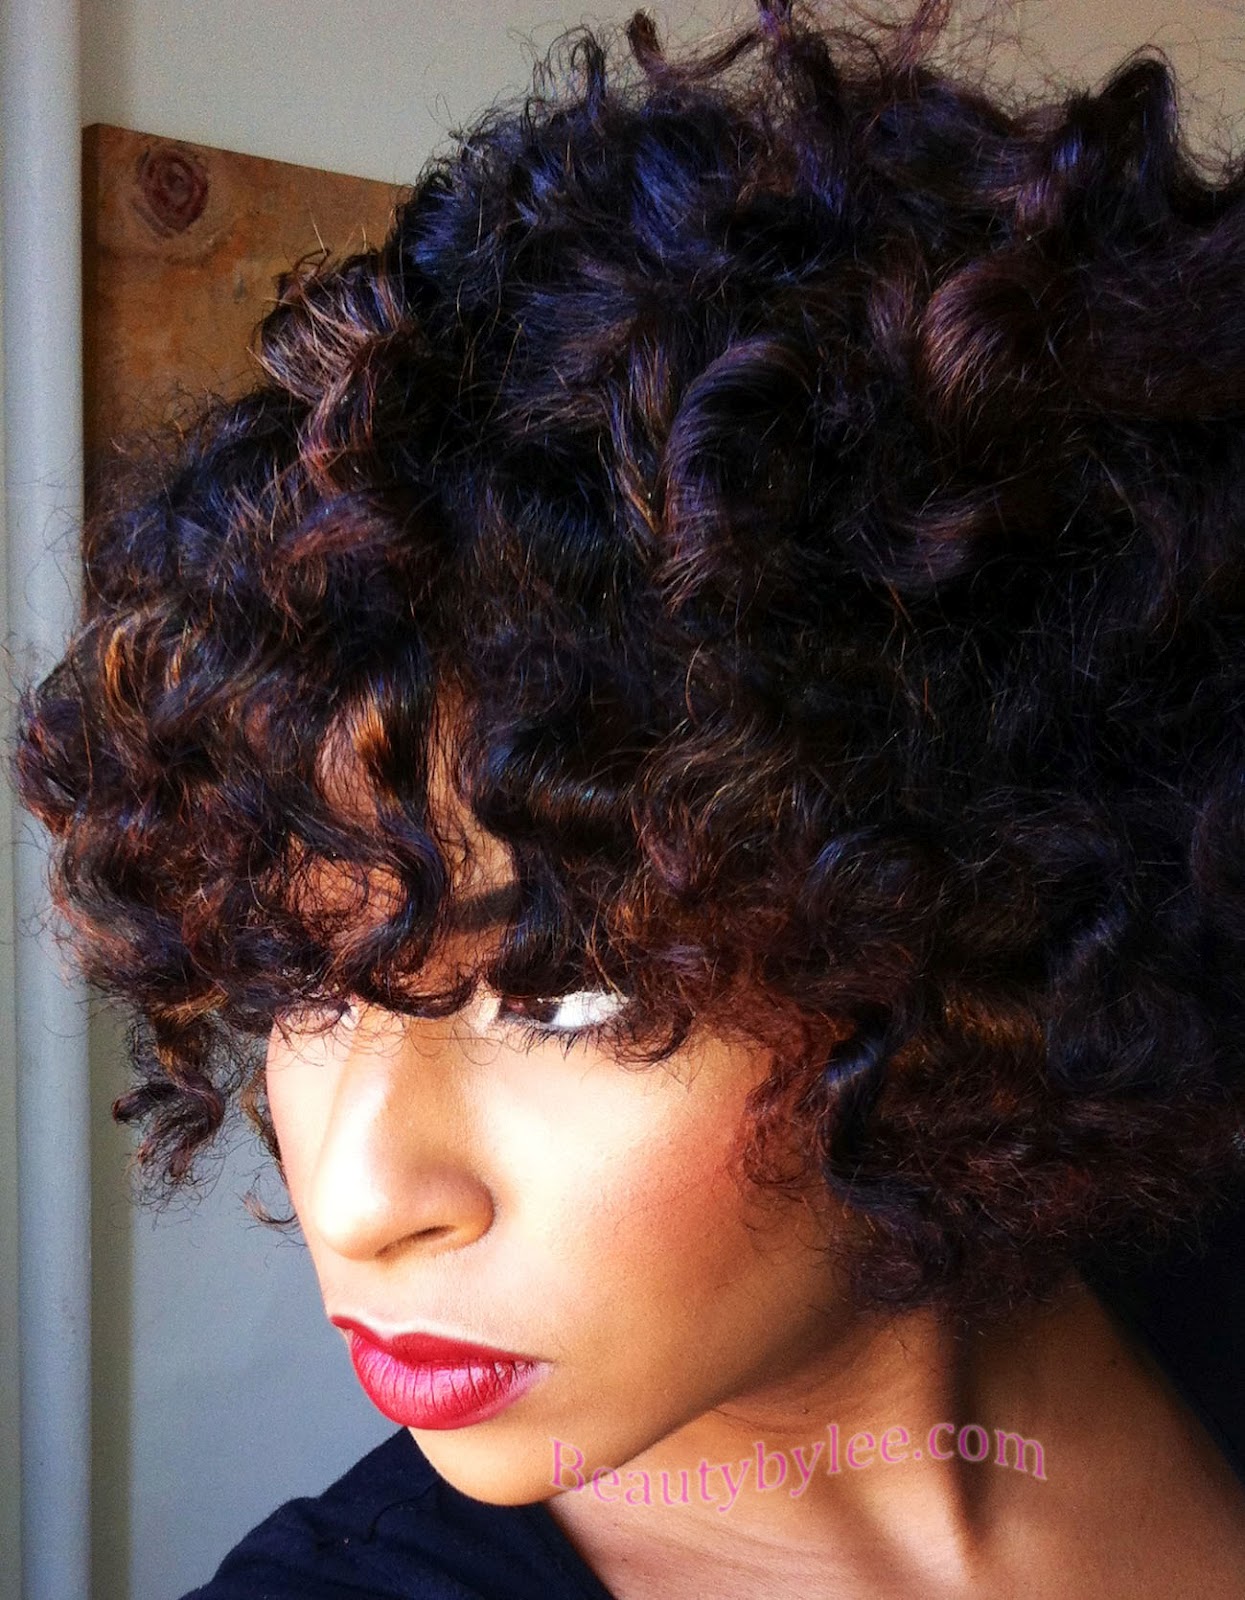 Bantu Knot Out Beauty By Lee